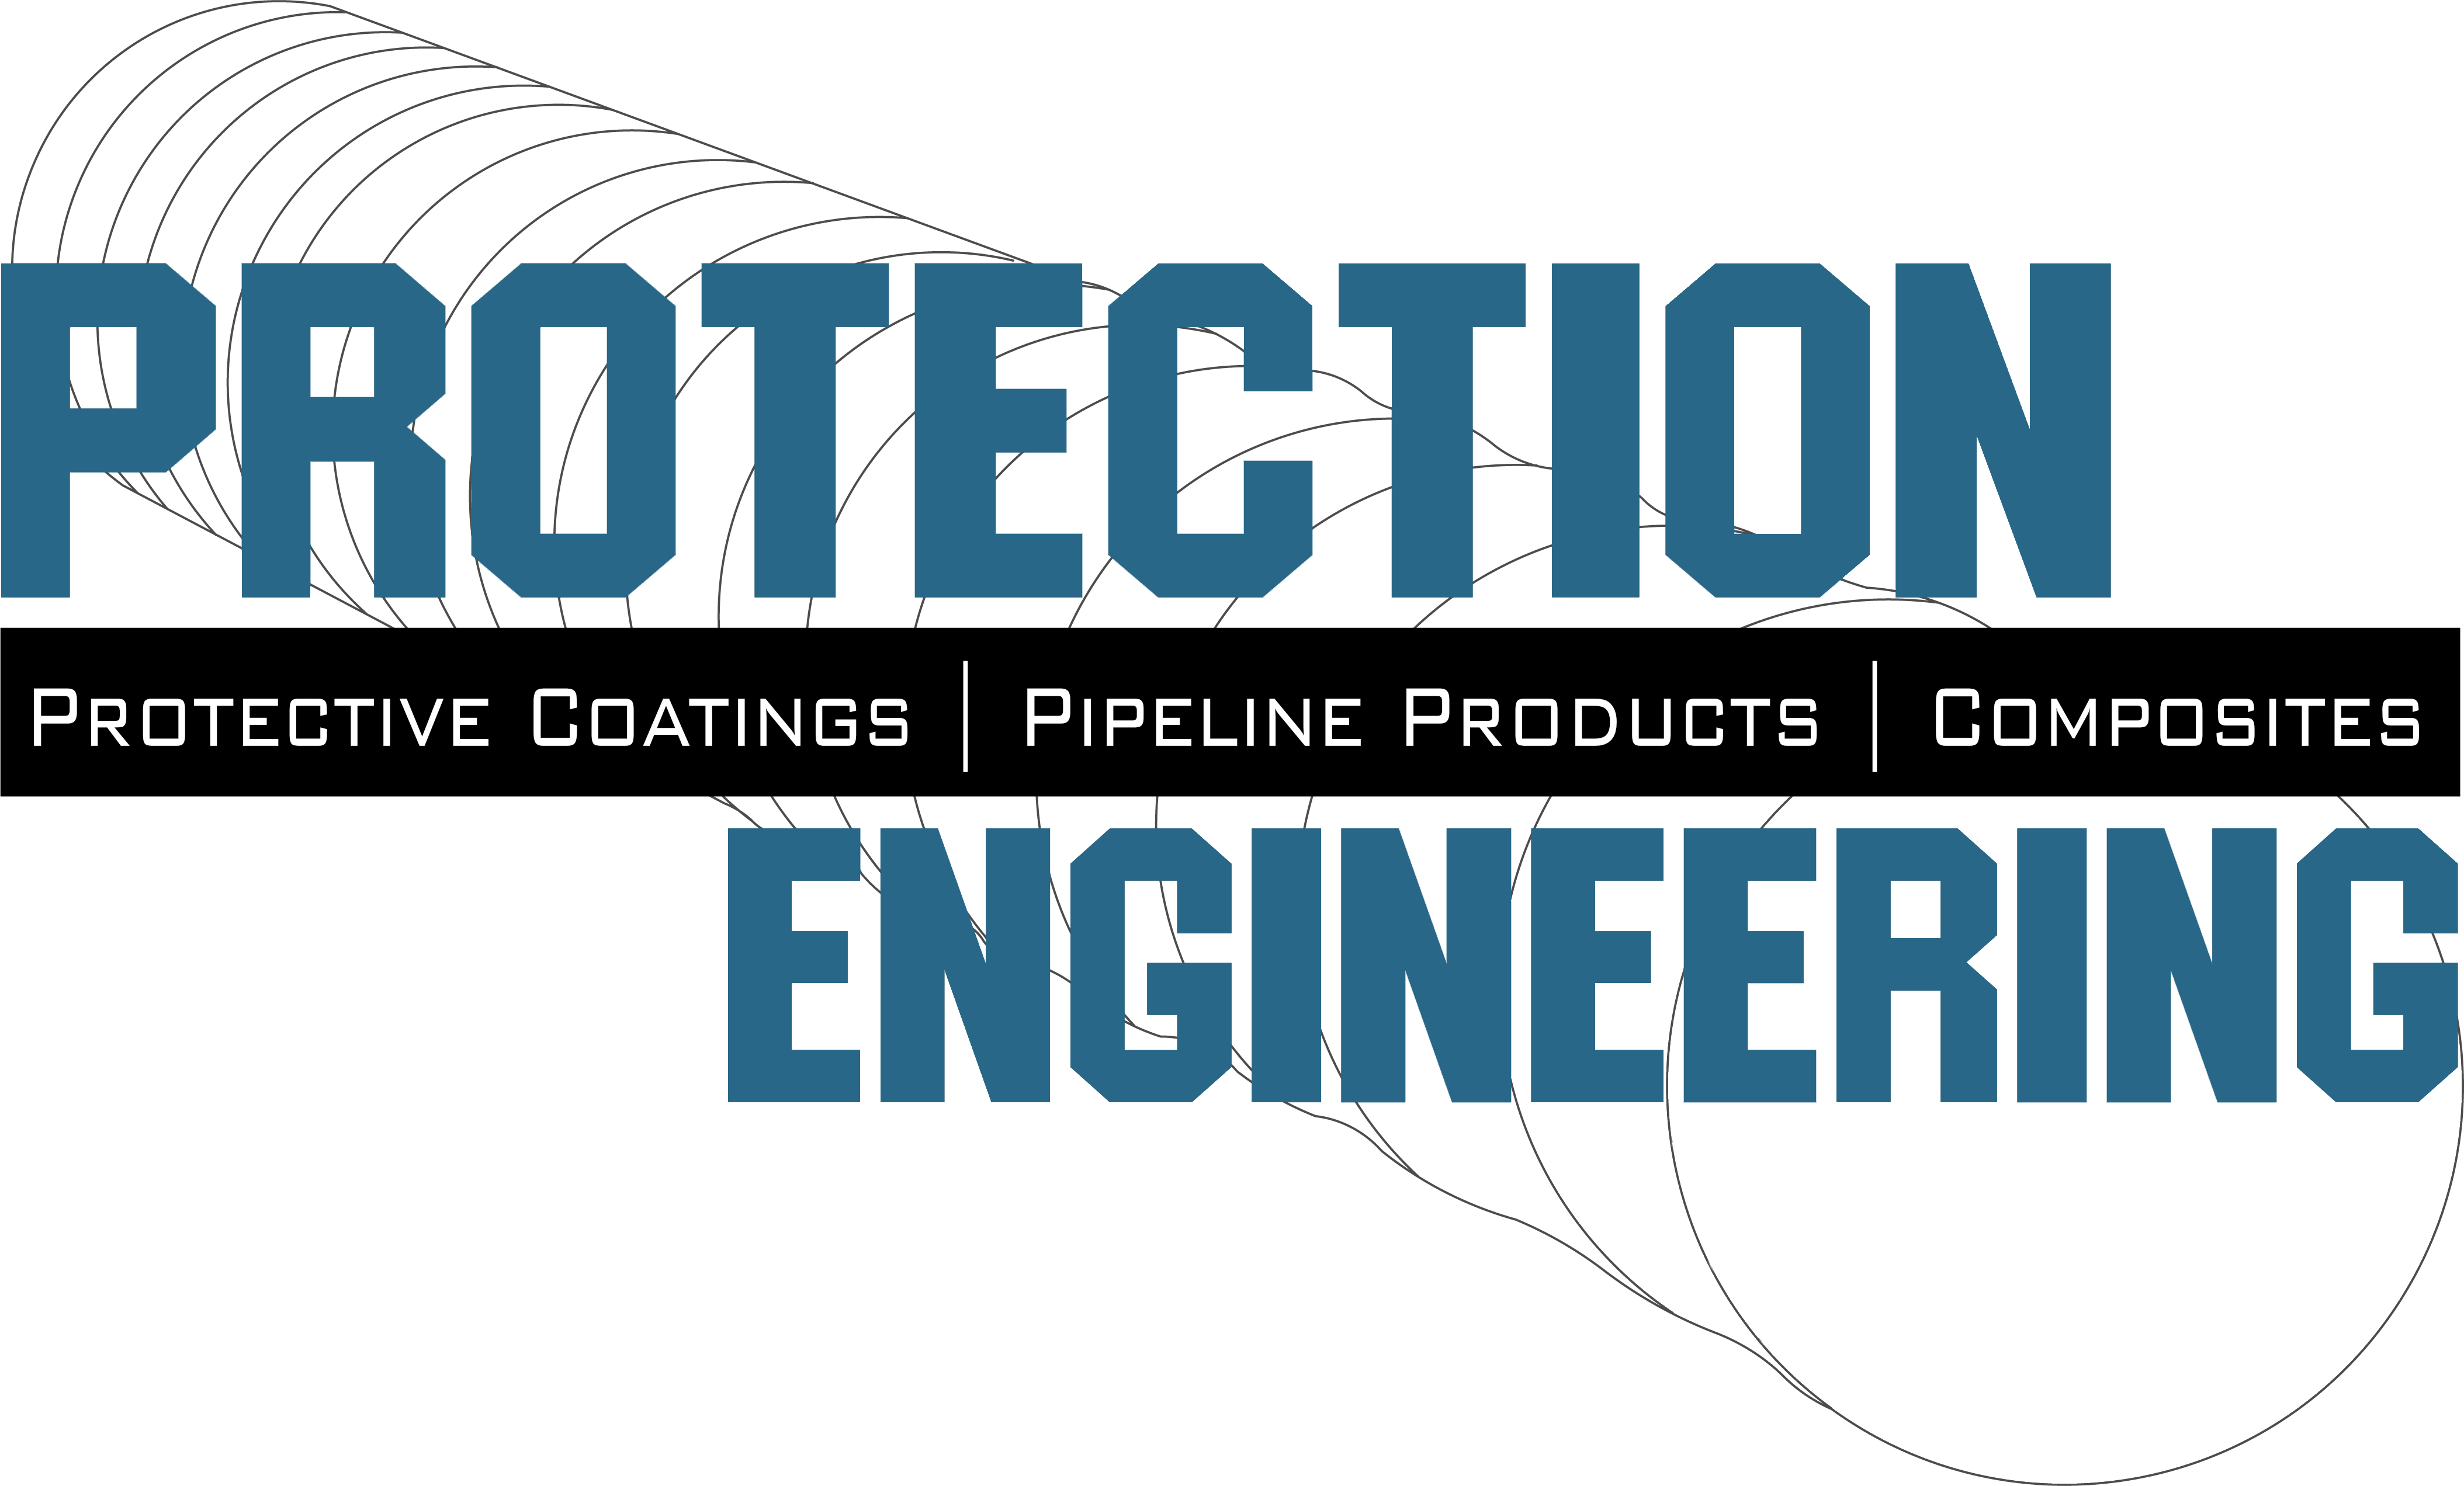 Protection Engineering